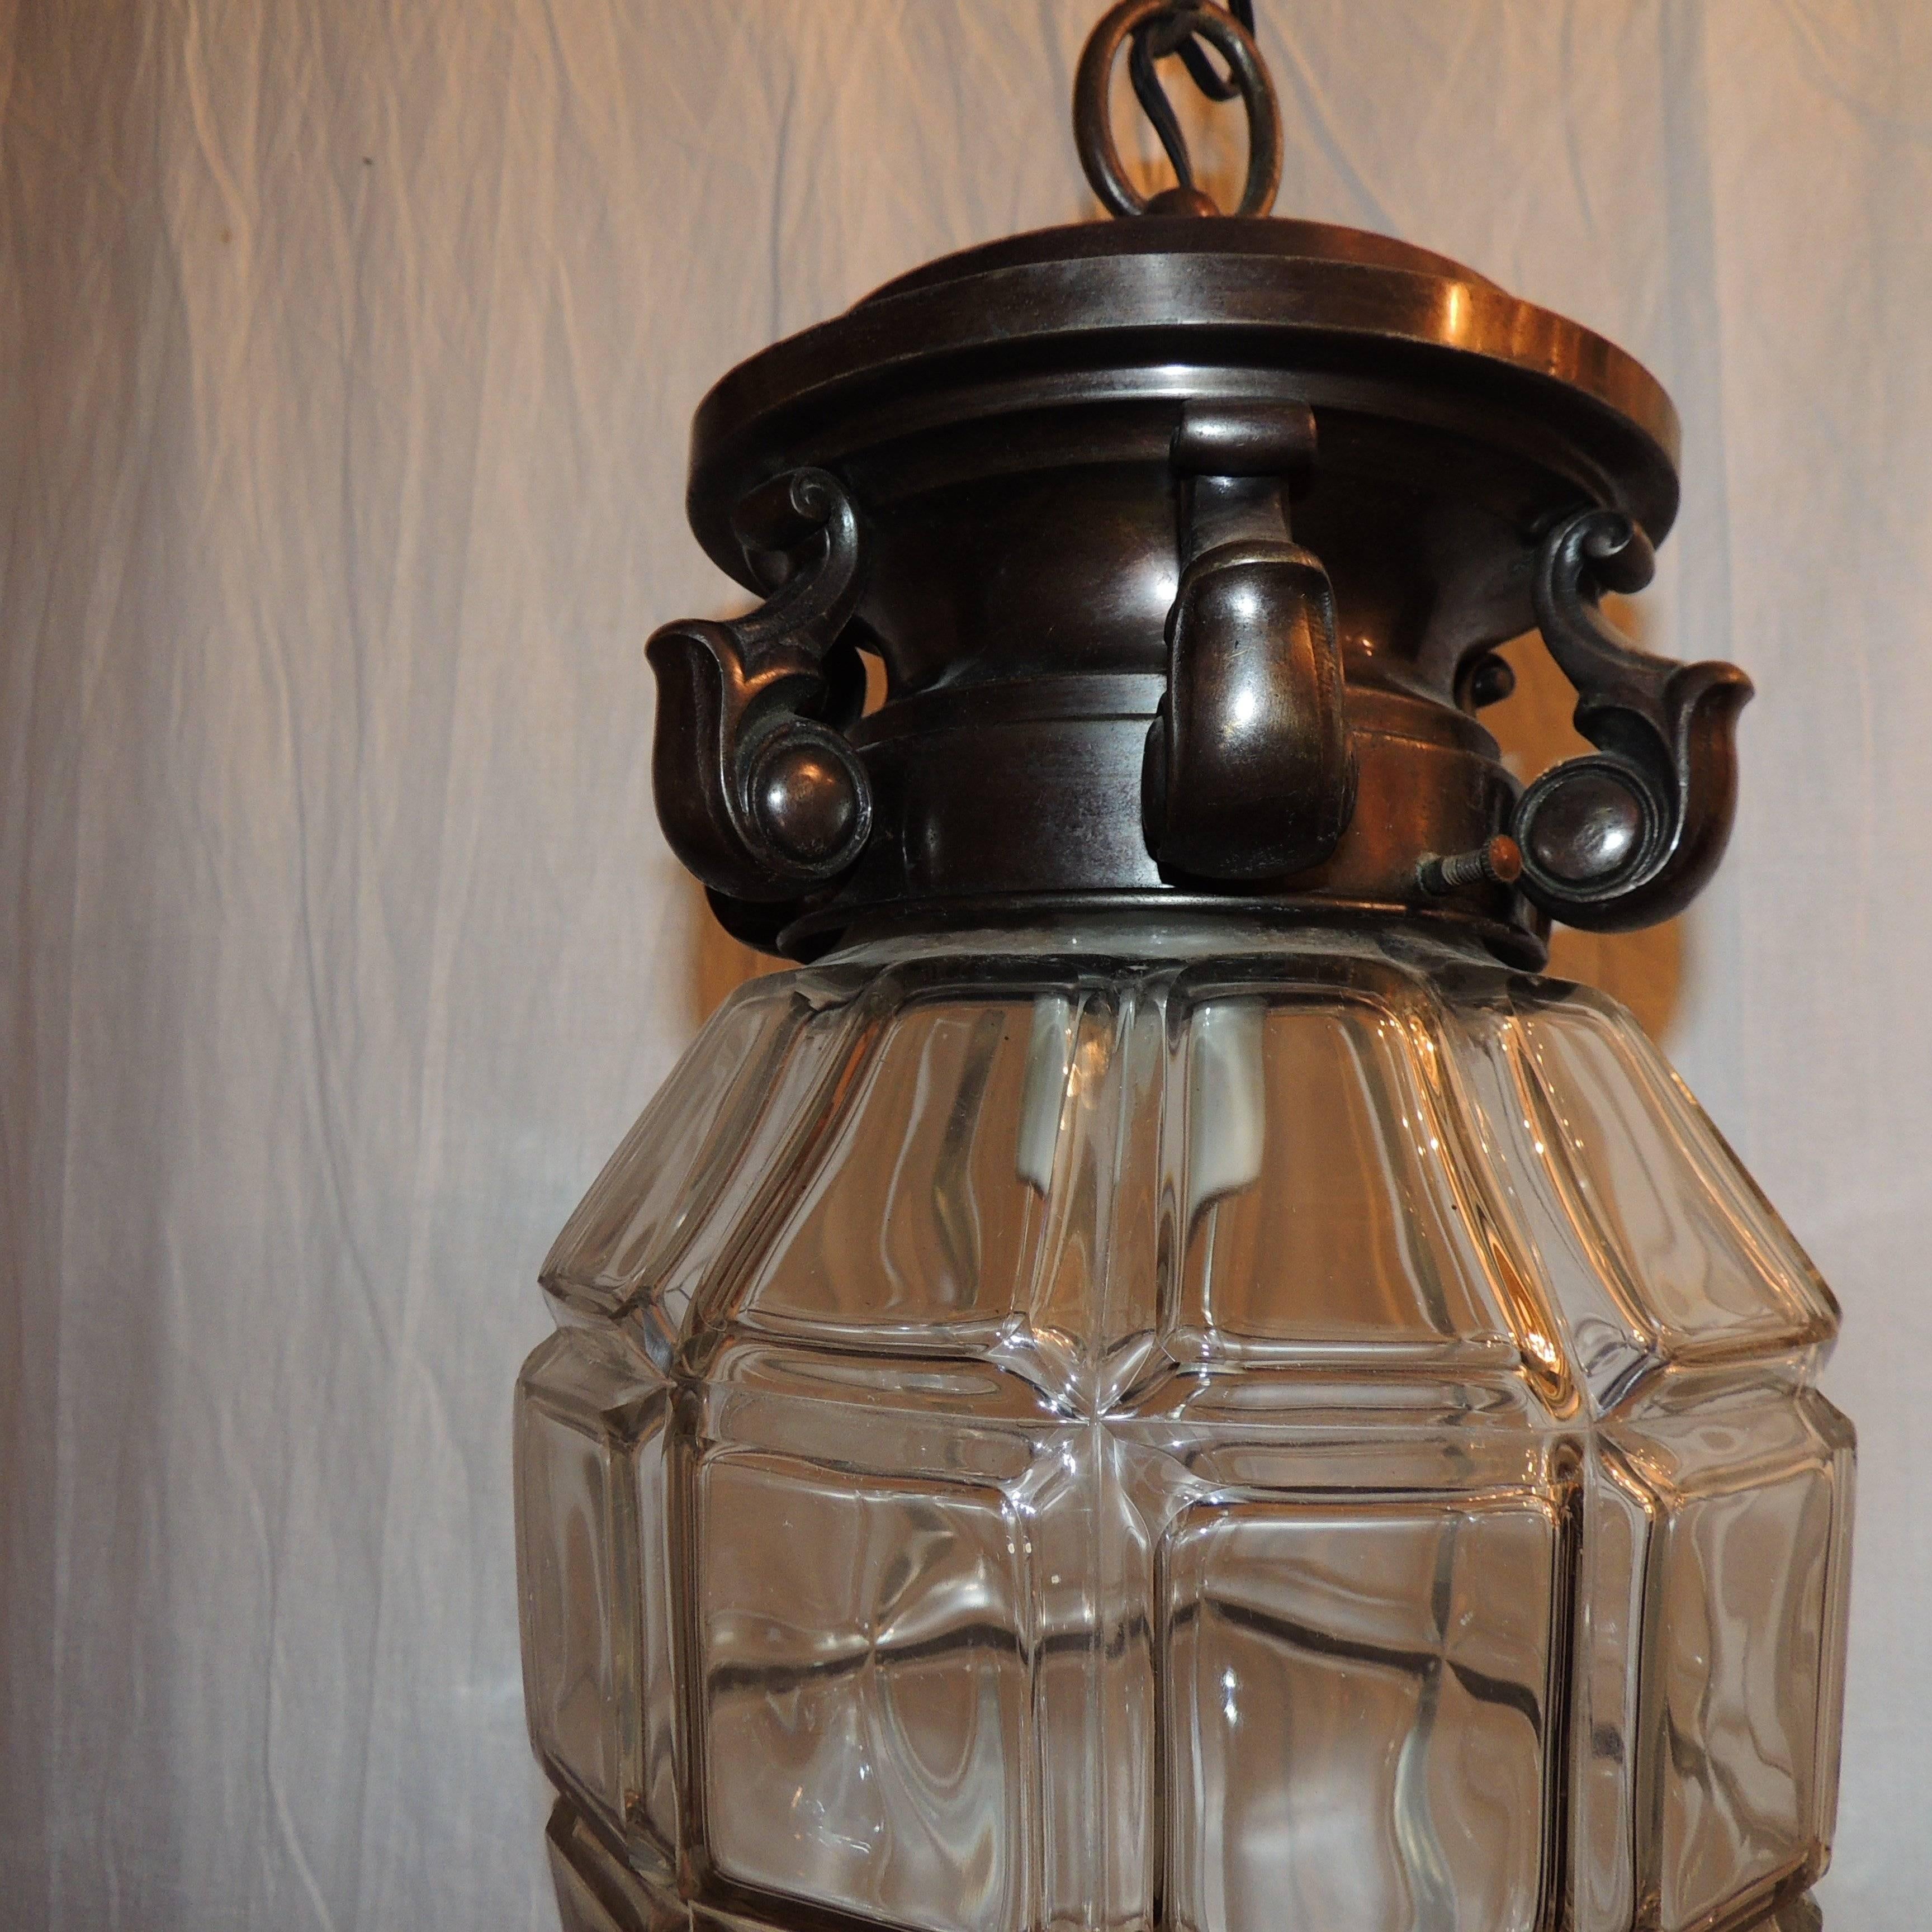 Handsome French Patine Bronze Beveled Panel Glass Lantern Pendent Fixture In Good Condition For Sale In Roslyn, NY